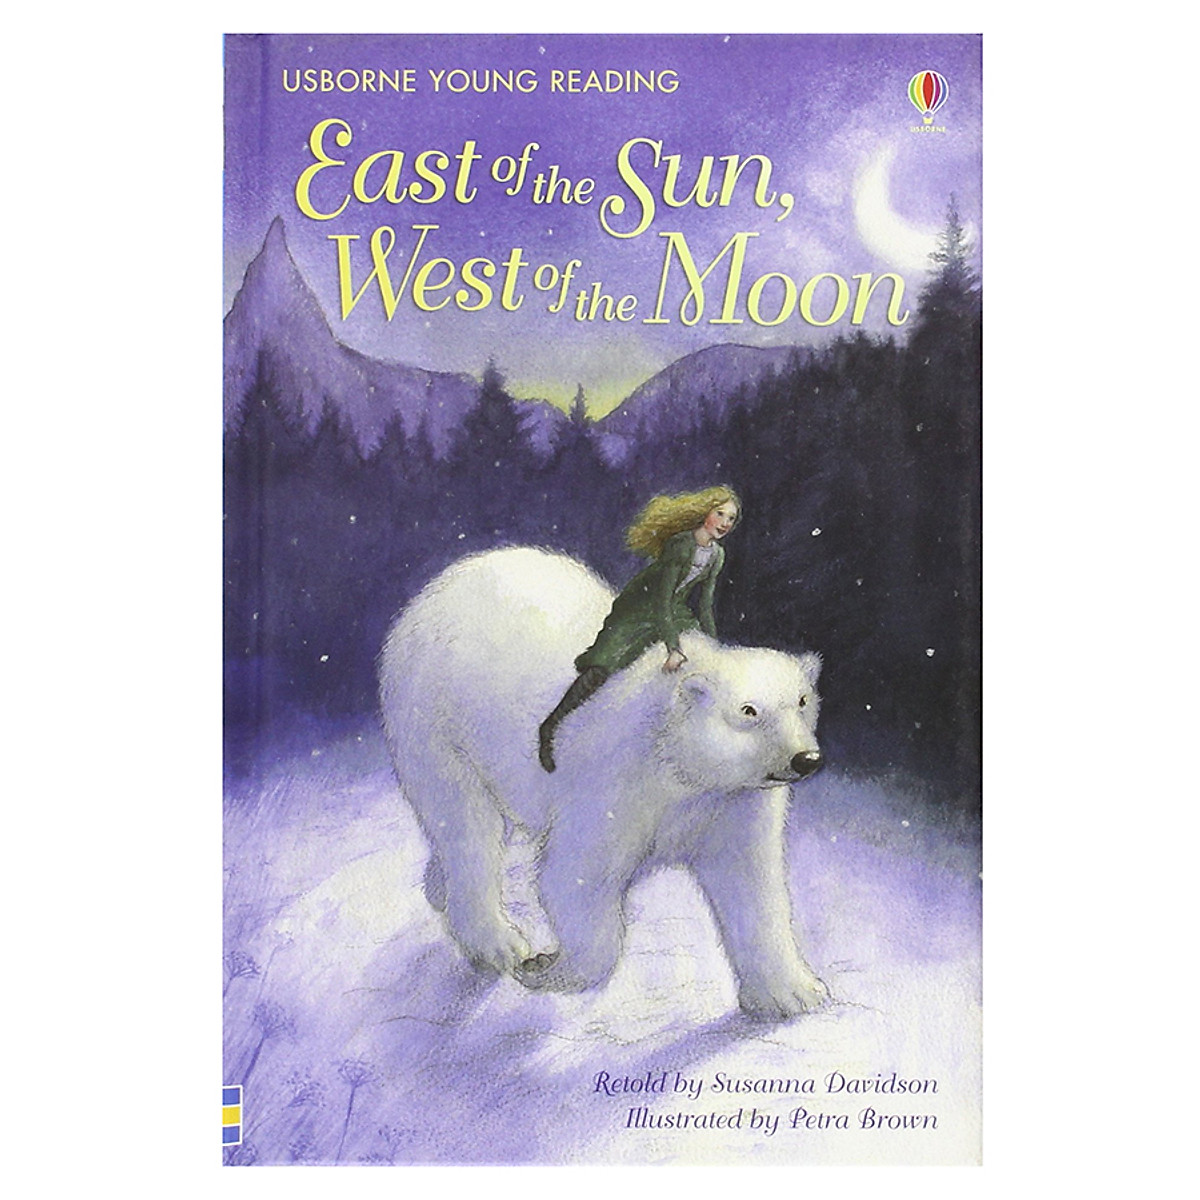 Usborne Young Reading Series Two: East of the Sun, West of the Moon